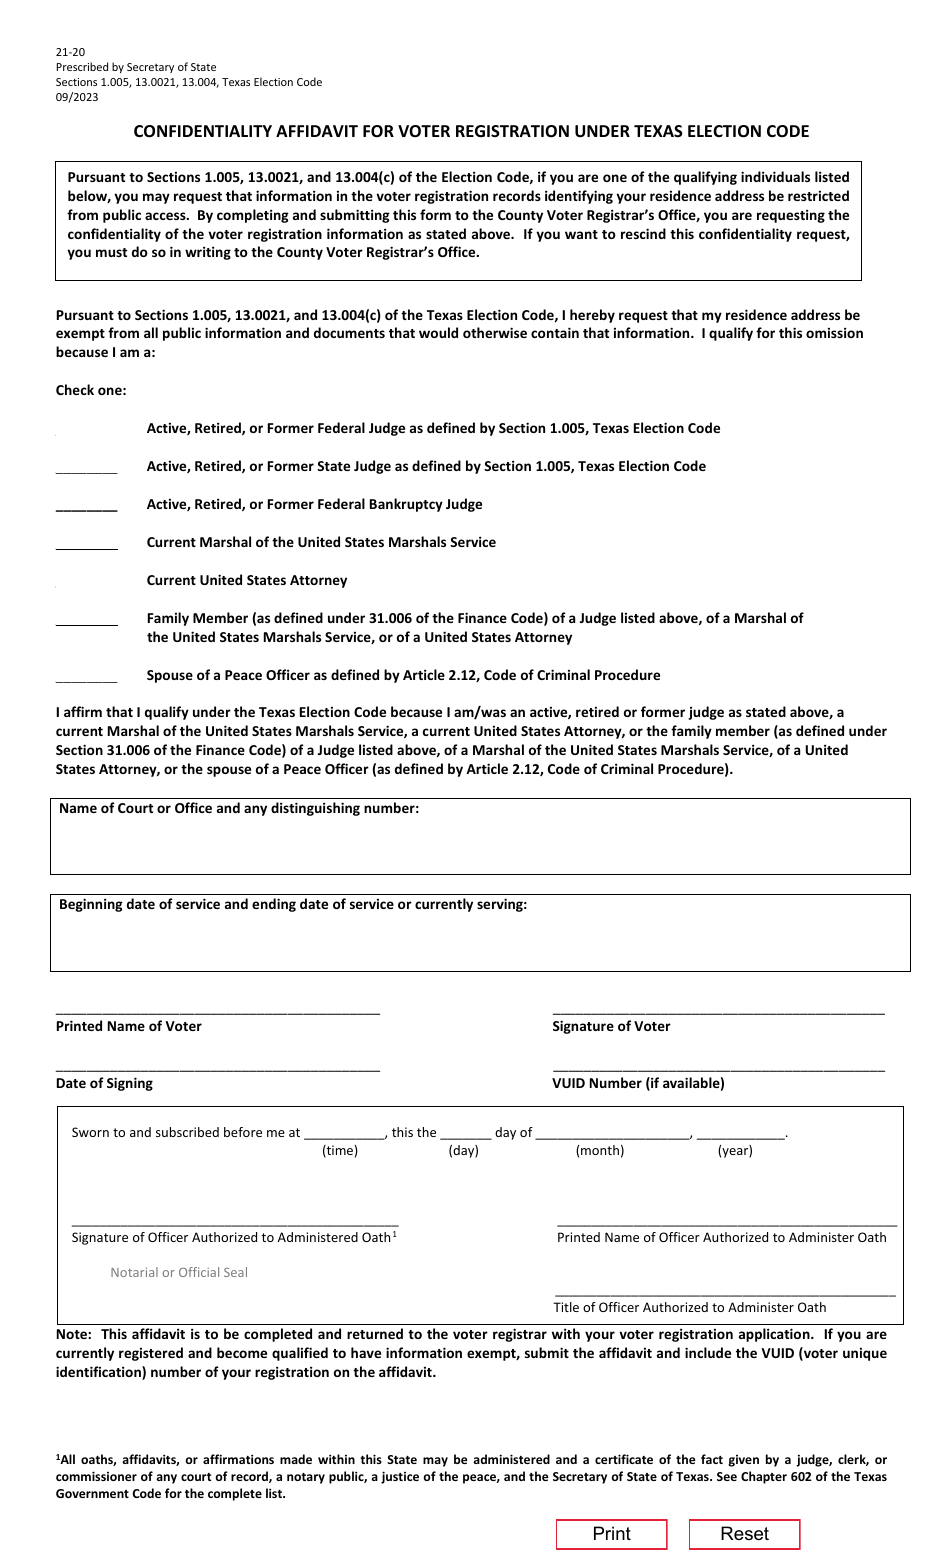 Form 21-20 Affidavit for Voter Registration Residential Address Confidentiality (Judicial) - Texas (English / Spanish), Page 1